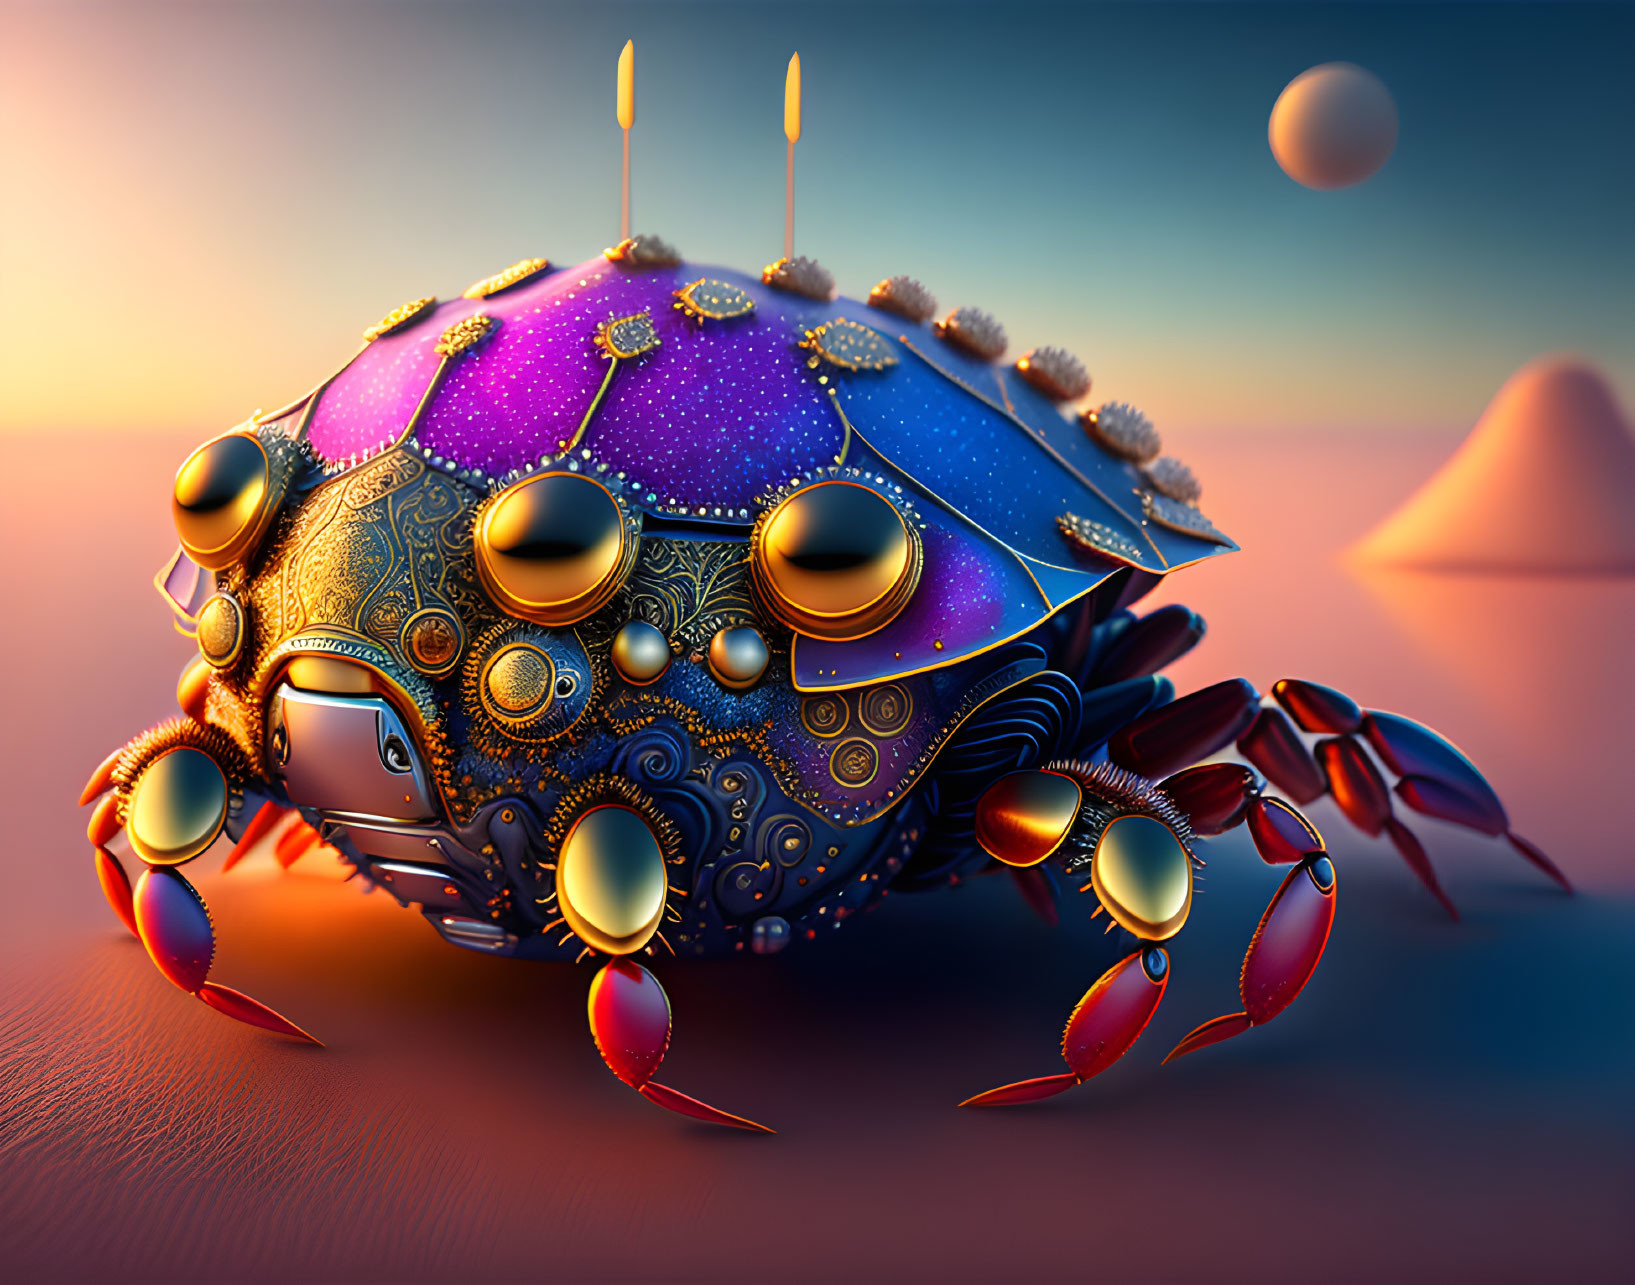 Mechanical crab art with ornate decorations in sunset scenery